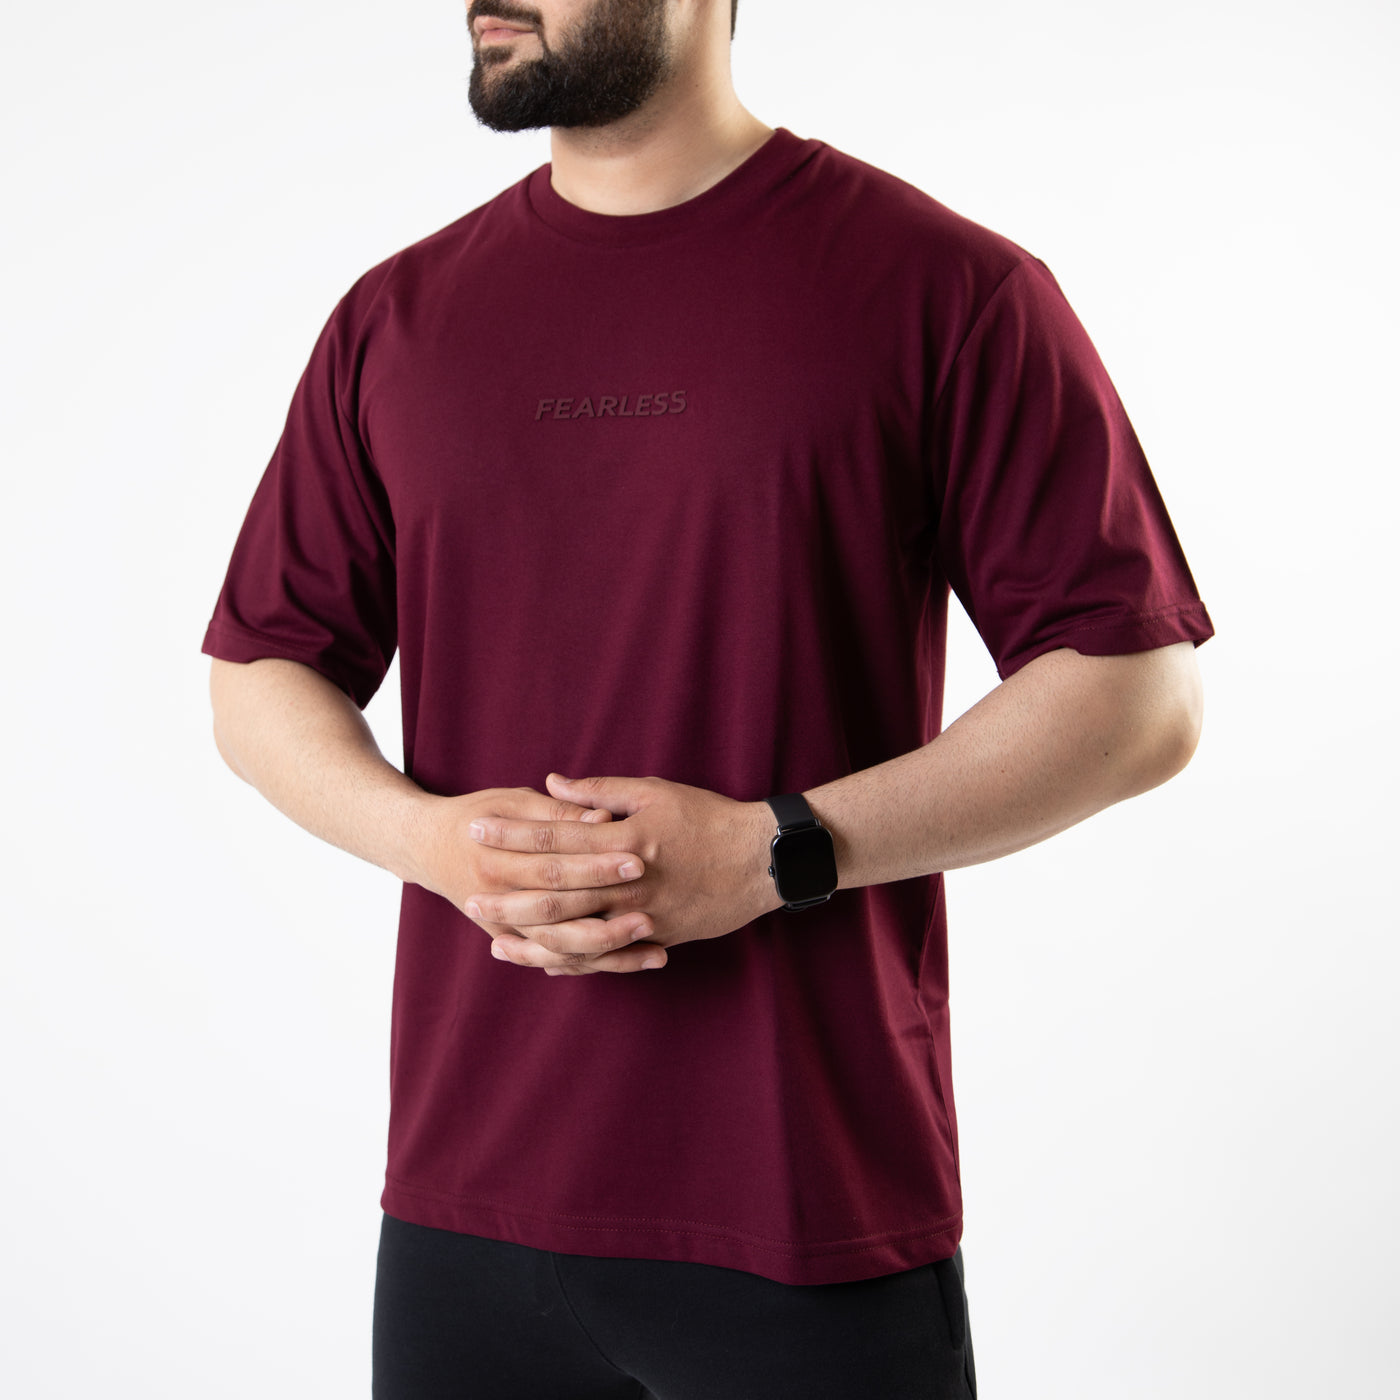 Wine Fearless Relaxed Fit T-Shirt